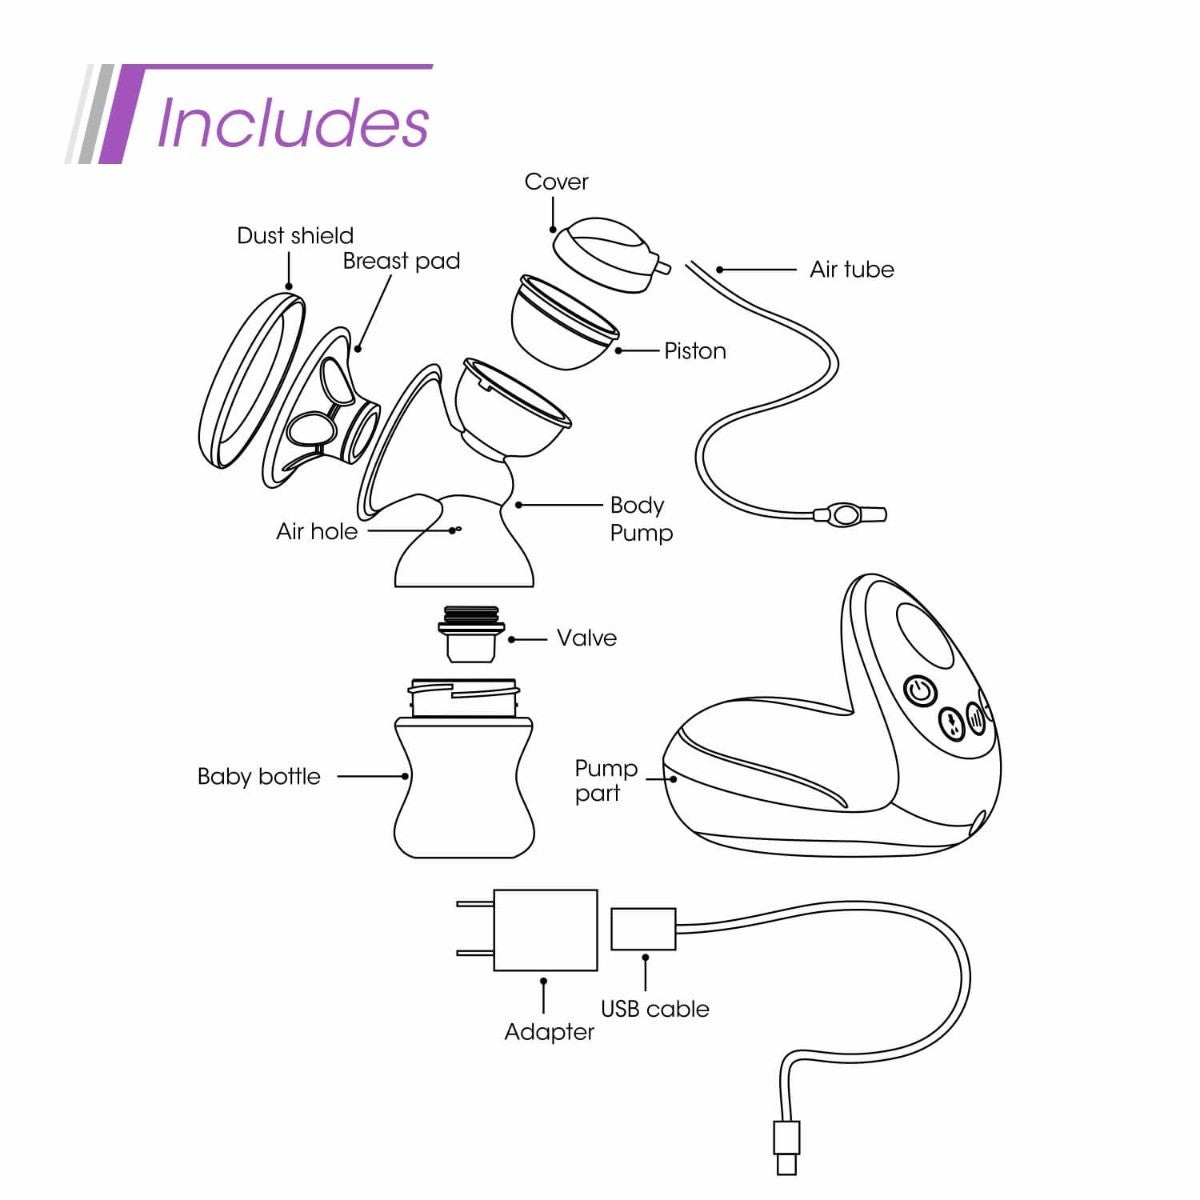 R FOR RABBIT Electric Breast Pump - First Feed Elite